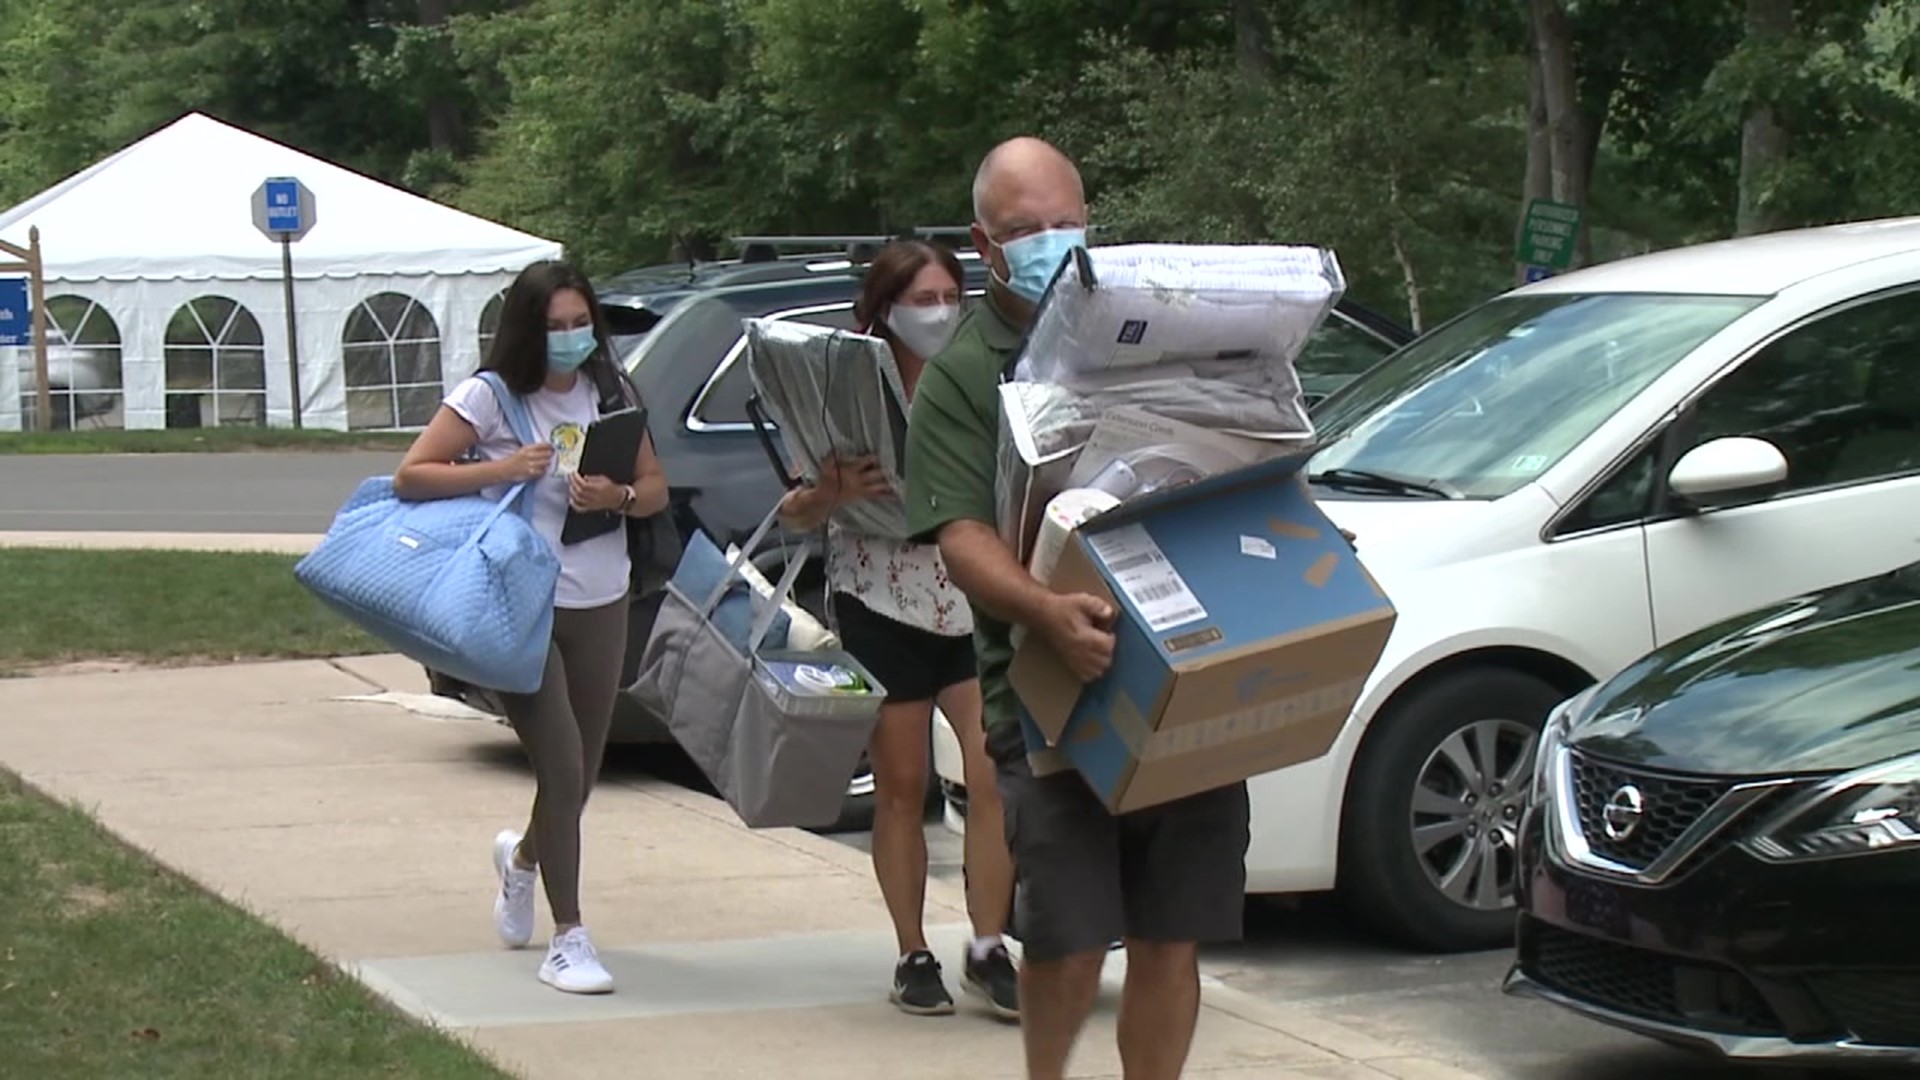 Students and their families across Luzerne County were unloading belongings and heading into dormitories as they begin their higher education.